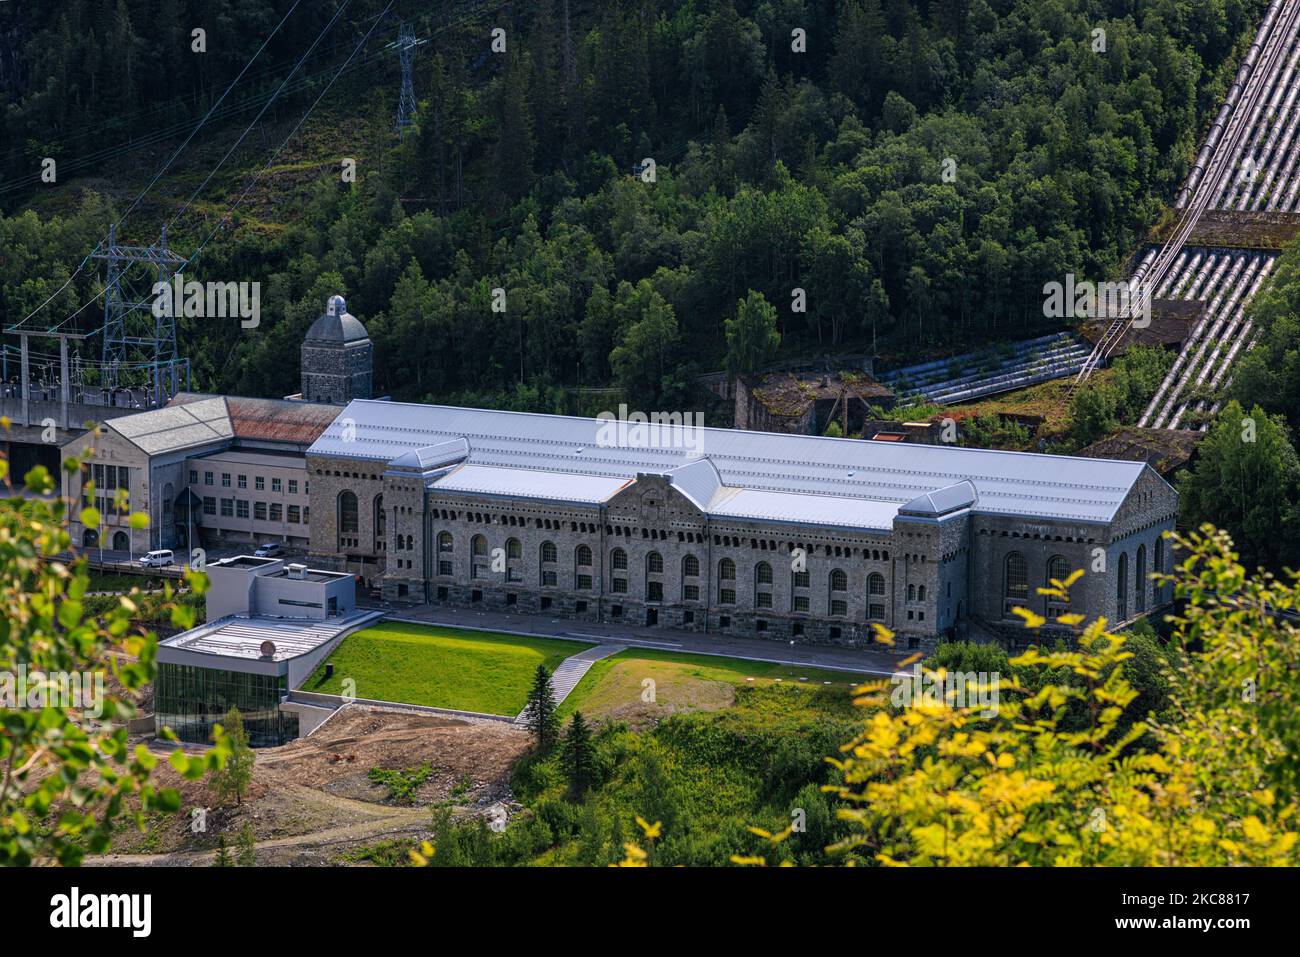 An aerial shot of the Vemork power station with the surrounding forest in Rjukan, Norway Stock Photo